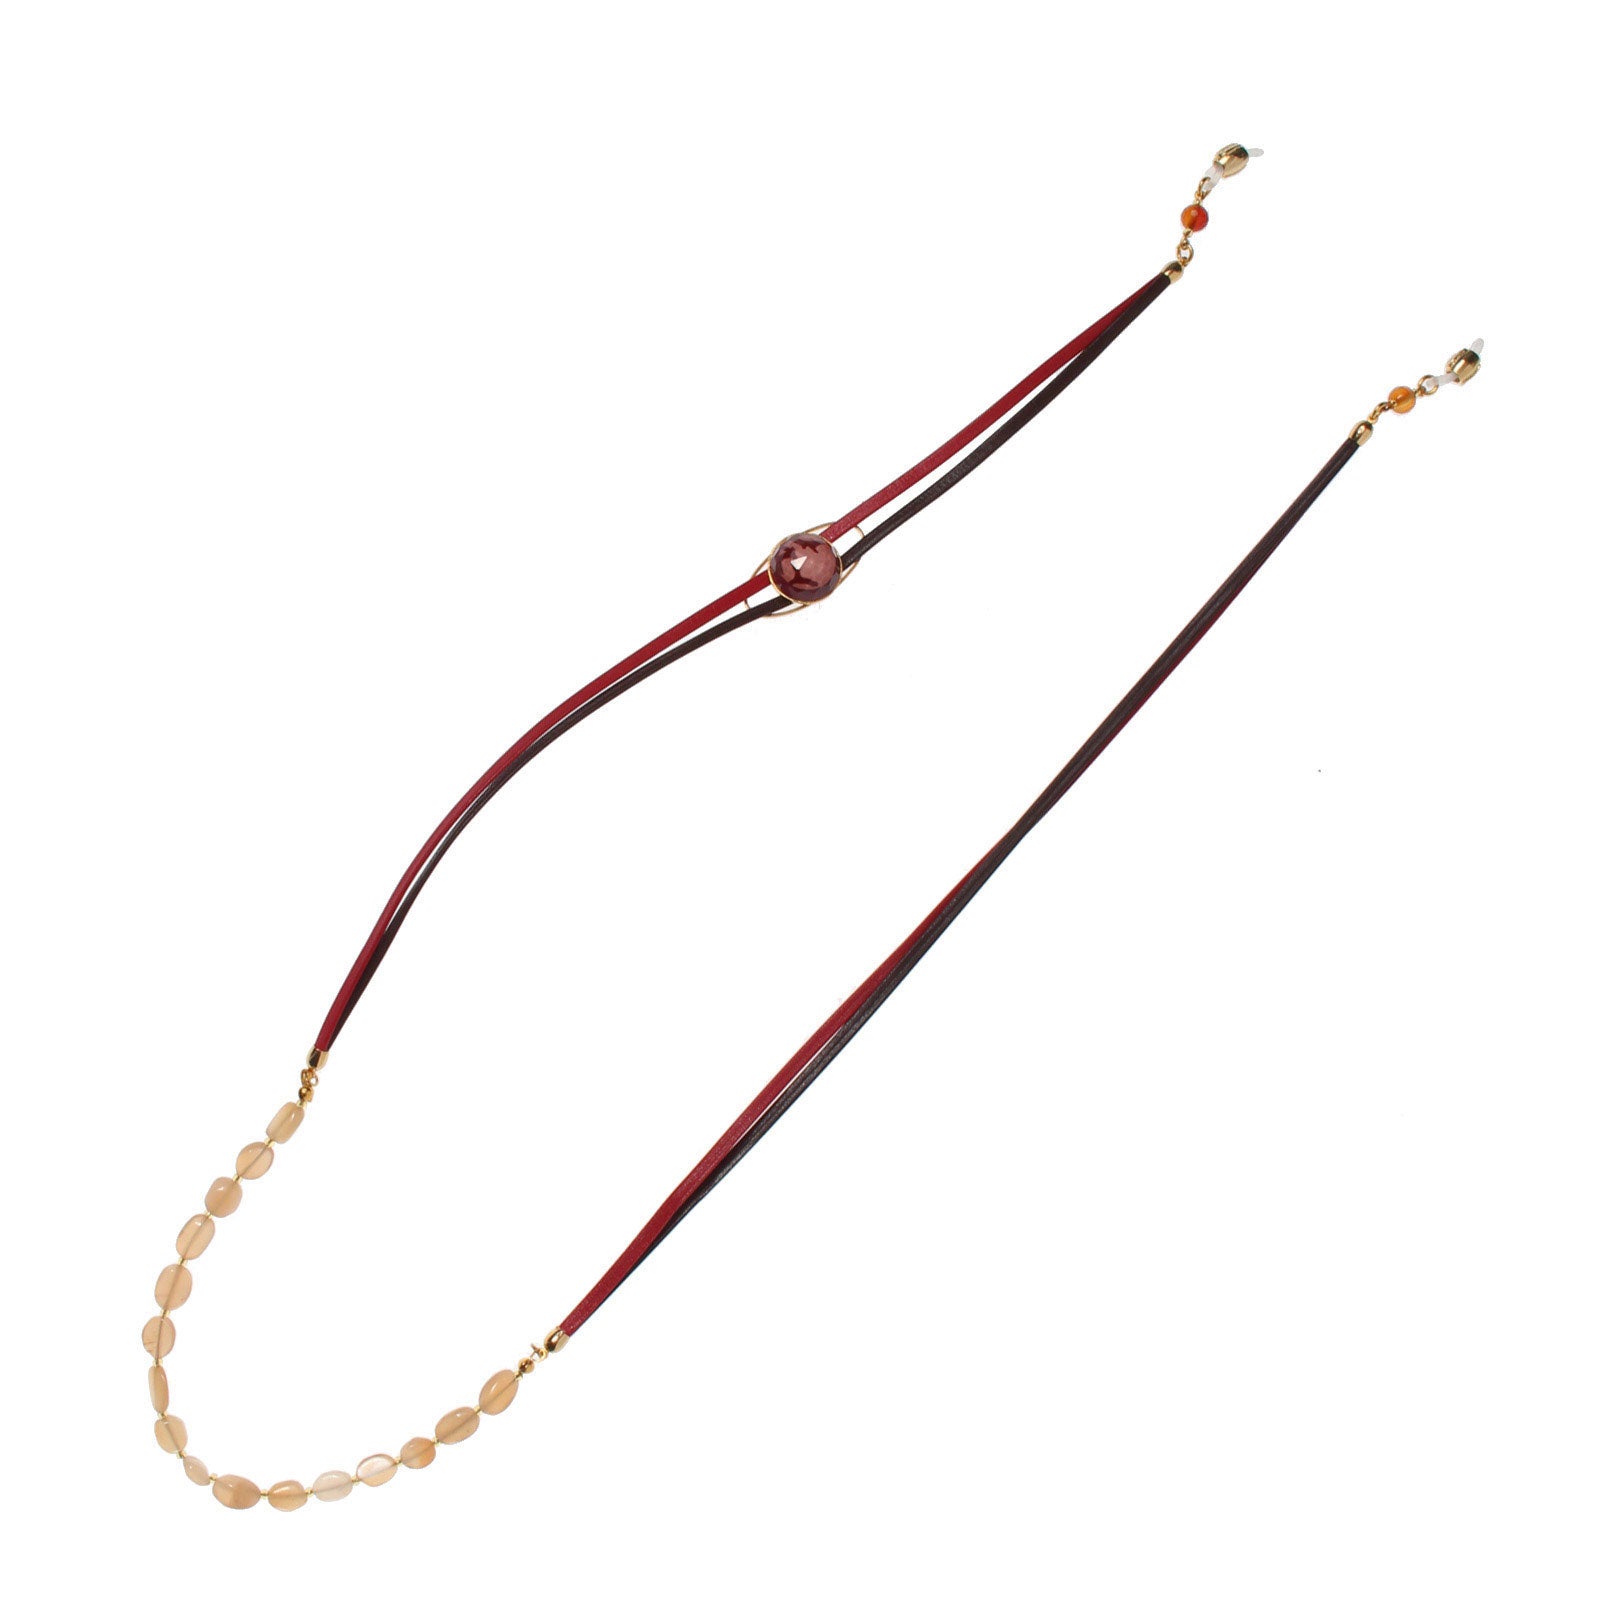 Eyeglass Chain Leather Red Moonstone Gold TAMARUSAN